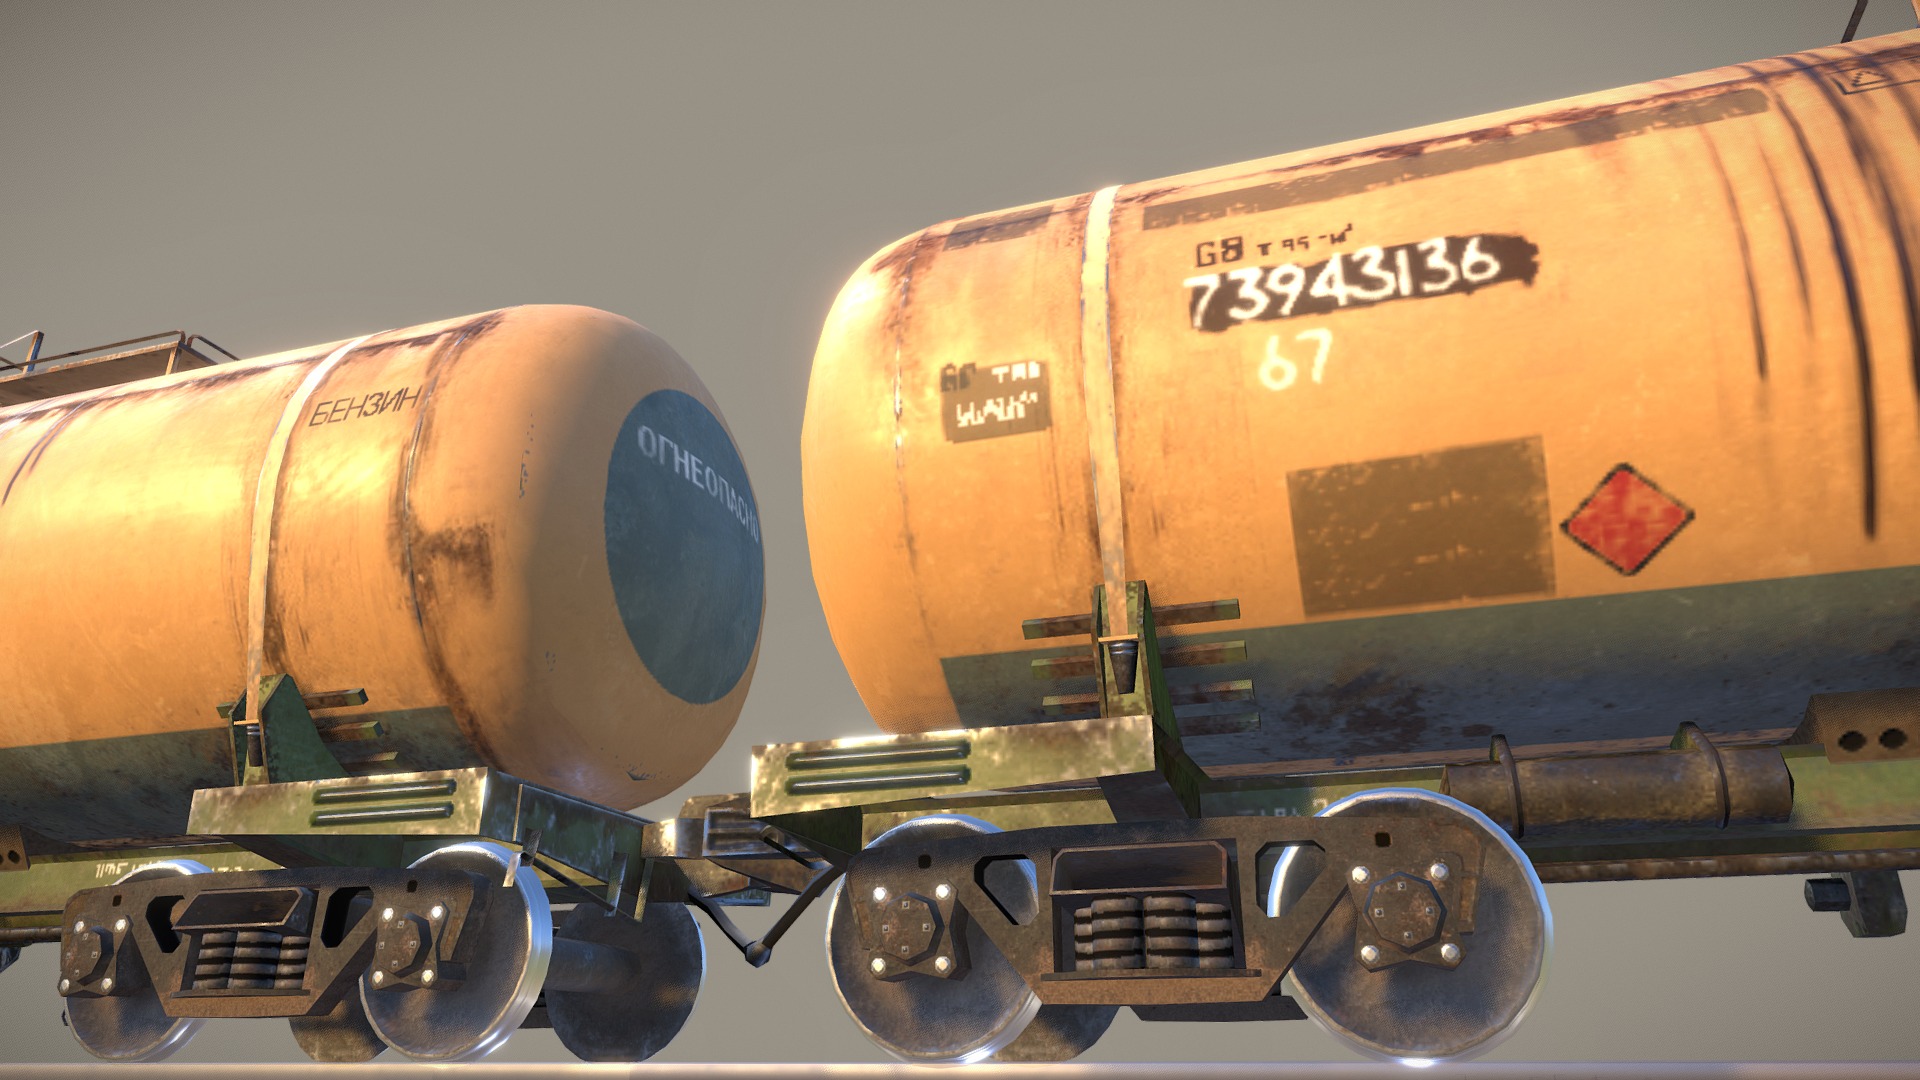 3D model Railway Oil Tank vr.1 - This is a 3D model of the Railway Oil Tank vr.1. The 3D model is about a train with a box on top.